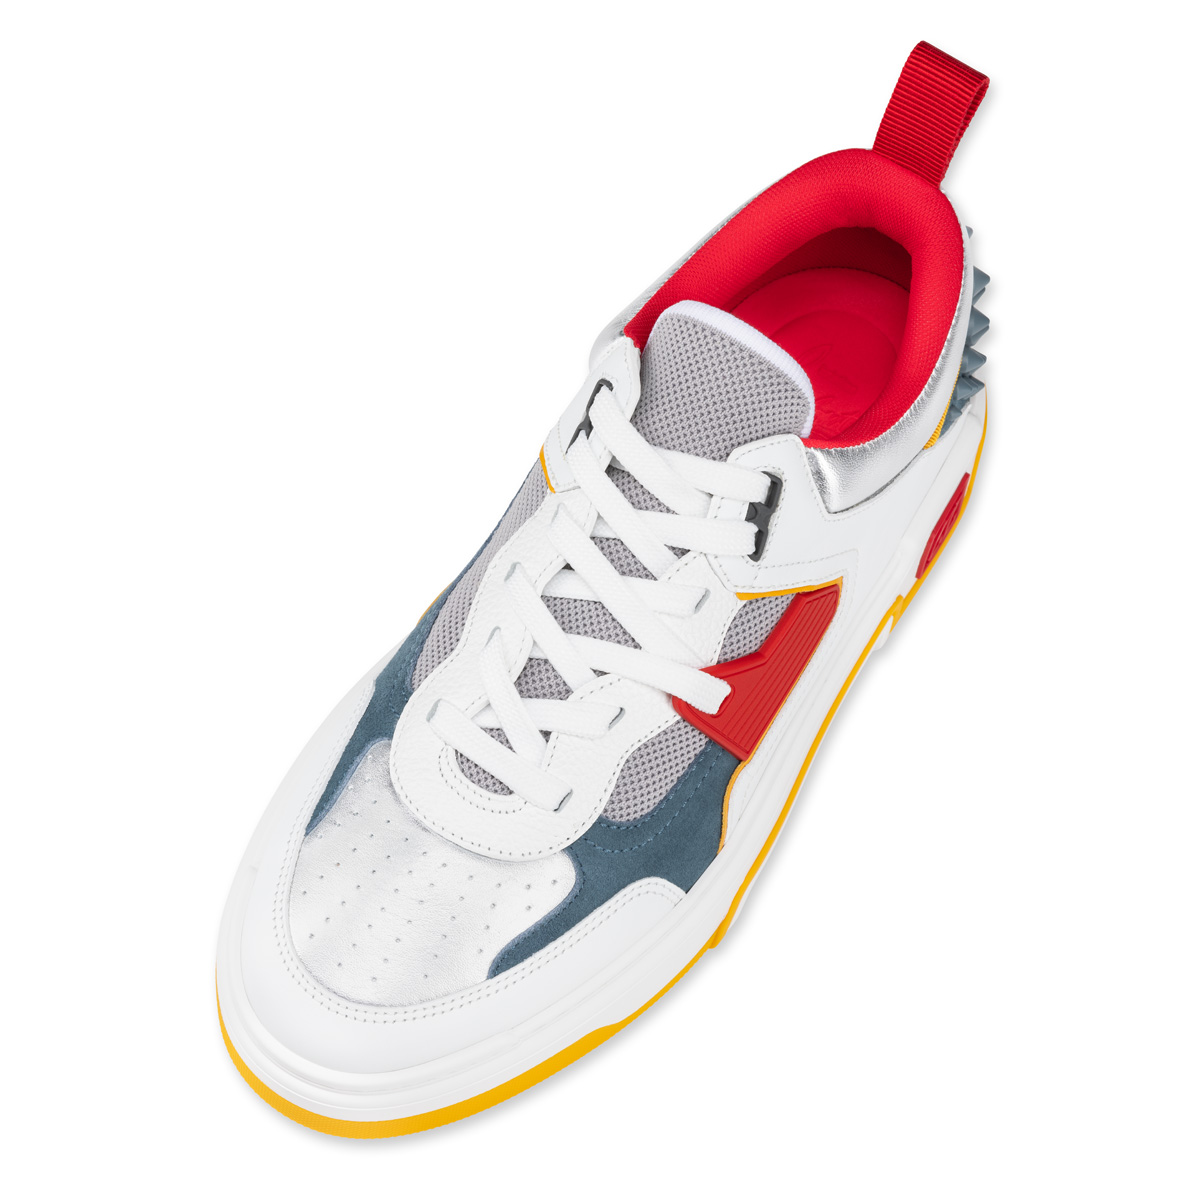 Astroloubi - Sneakers - Calf leather, suede and nappa leather - White -  Christian Louboutin